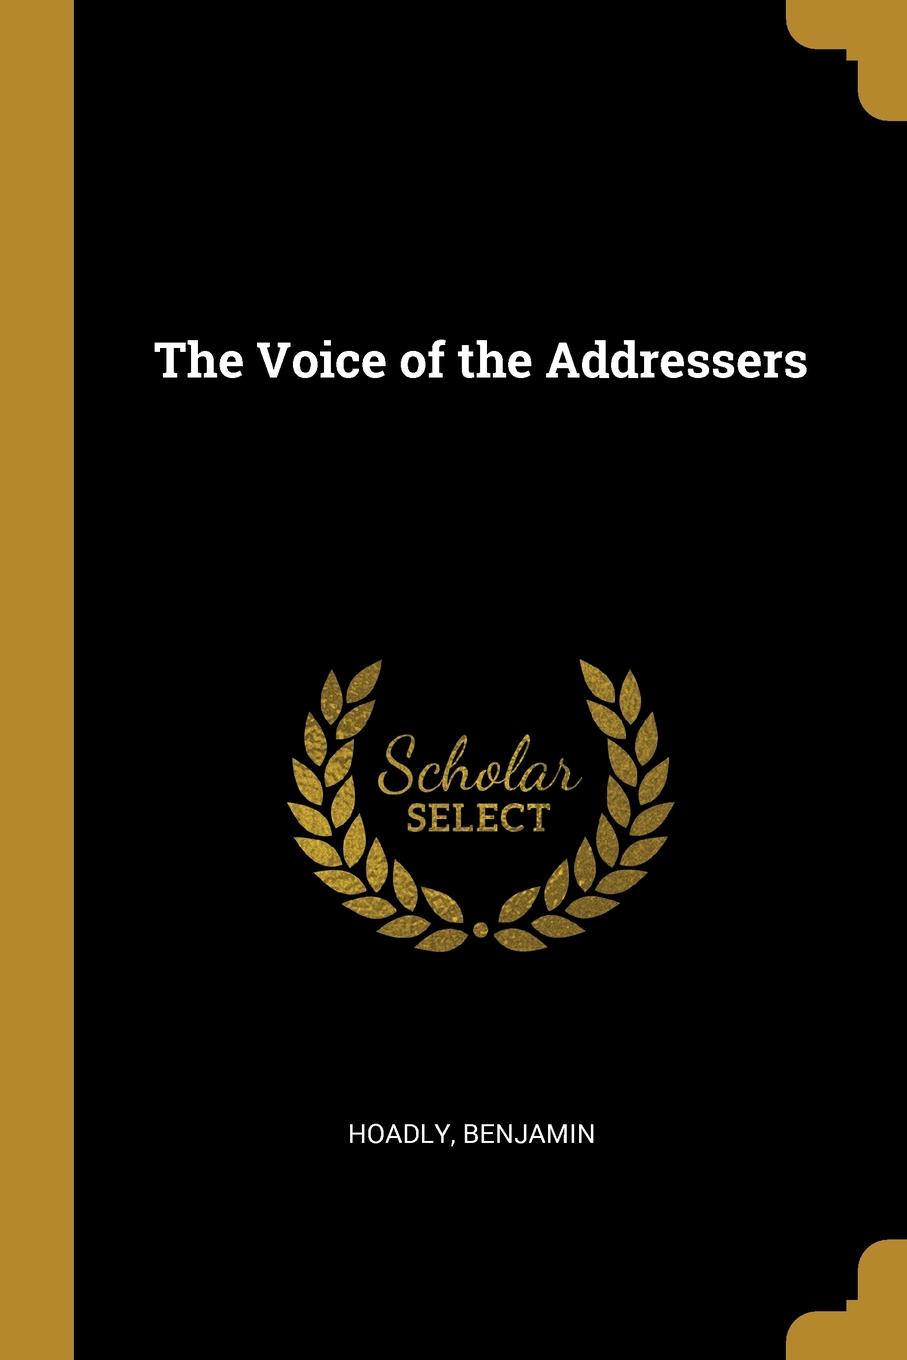 The Voice of the Addressers